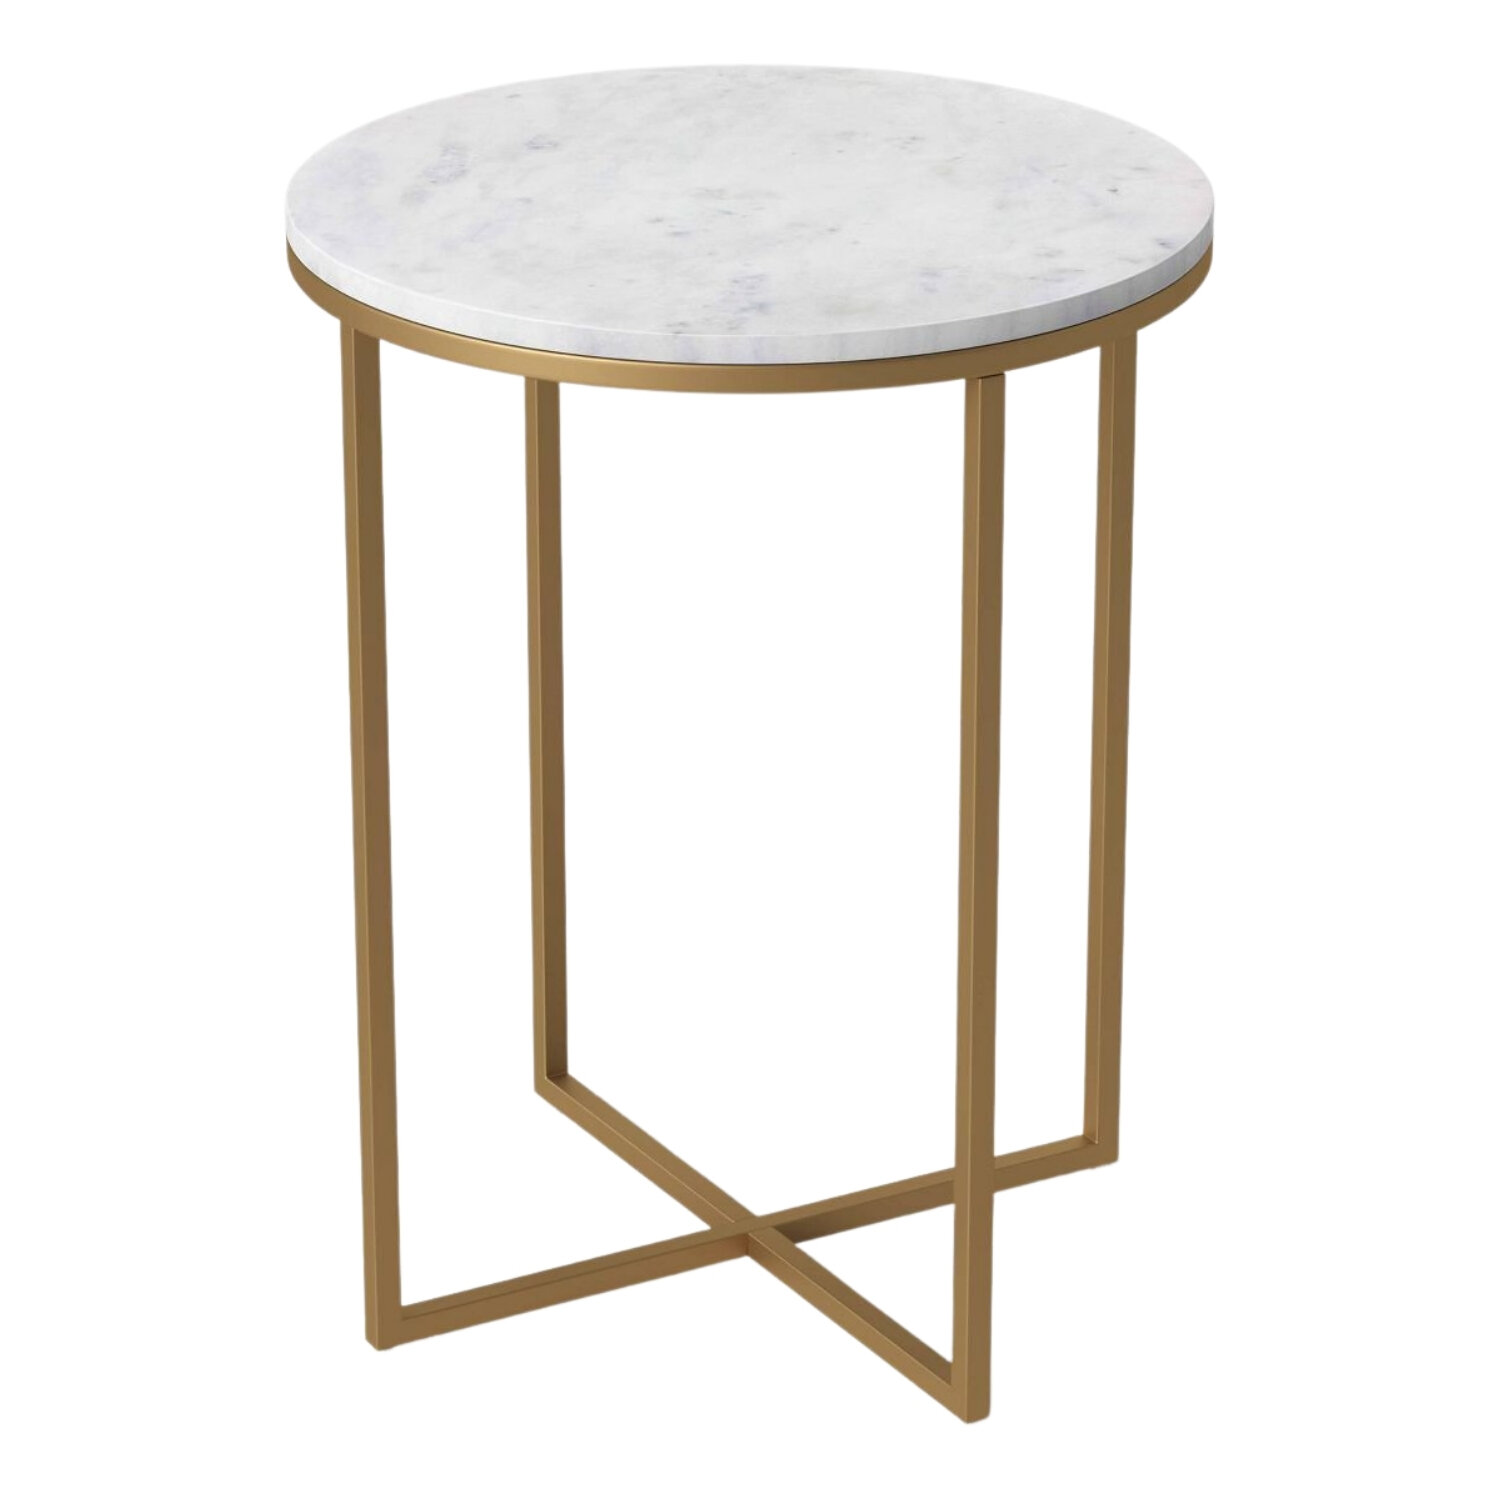 Marble Top End Table, Target, $100